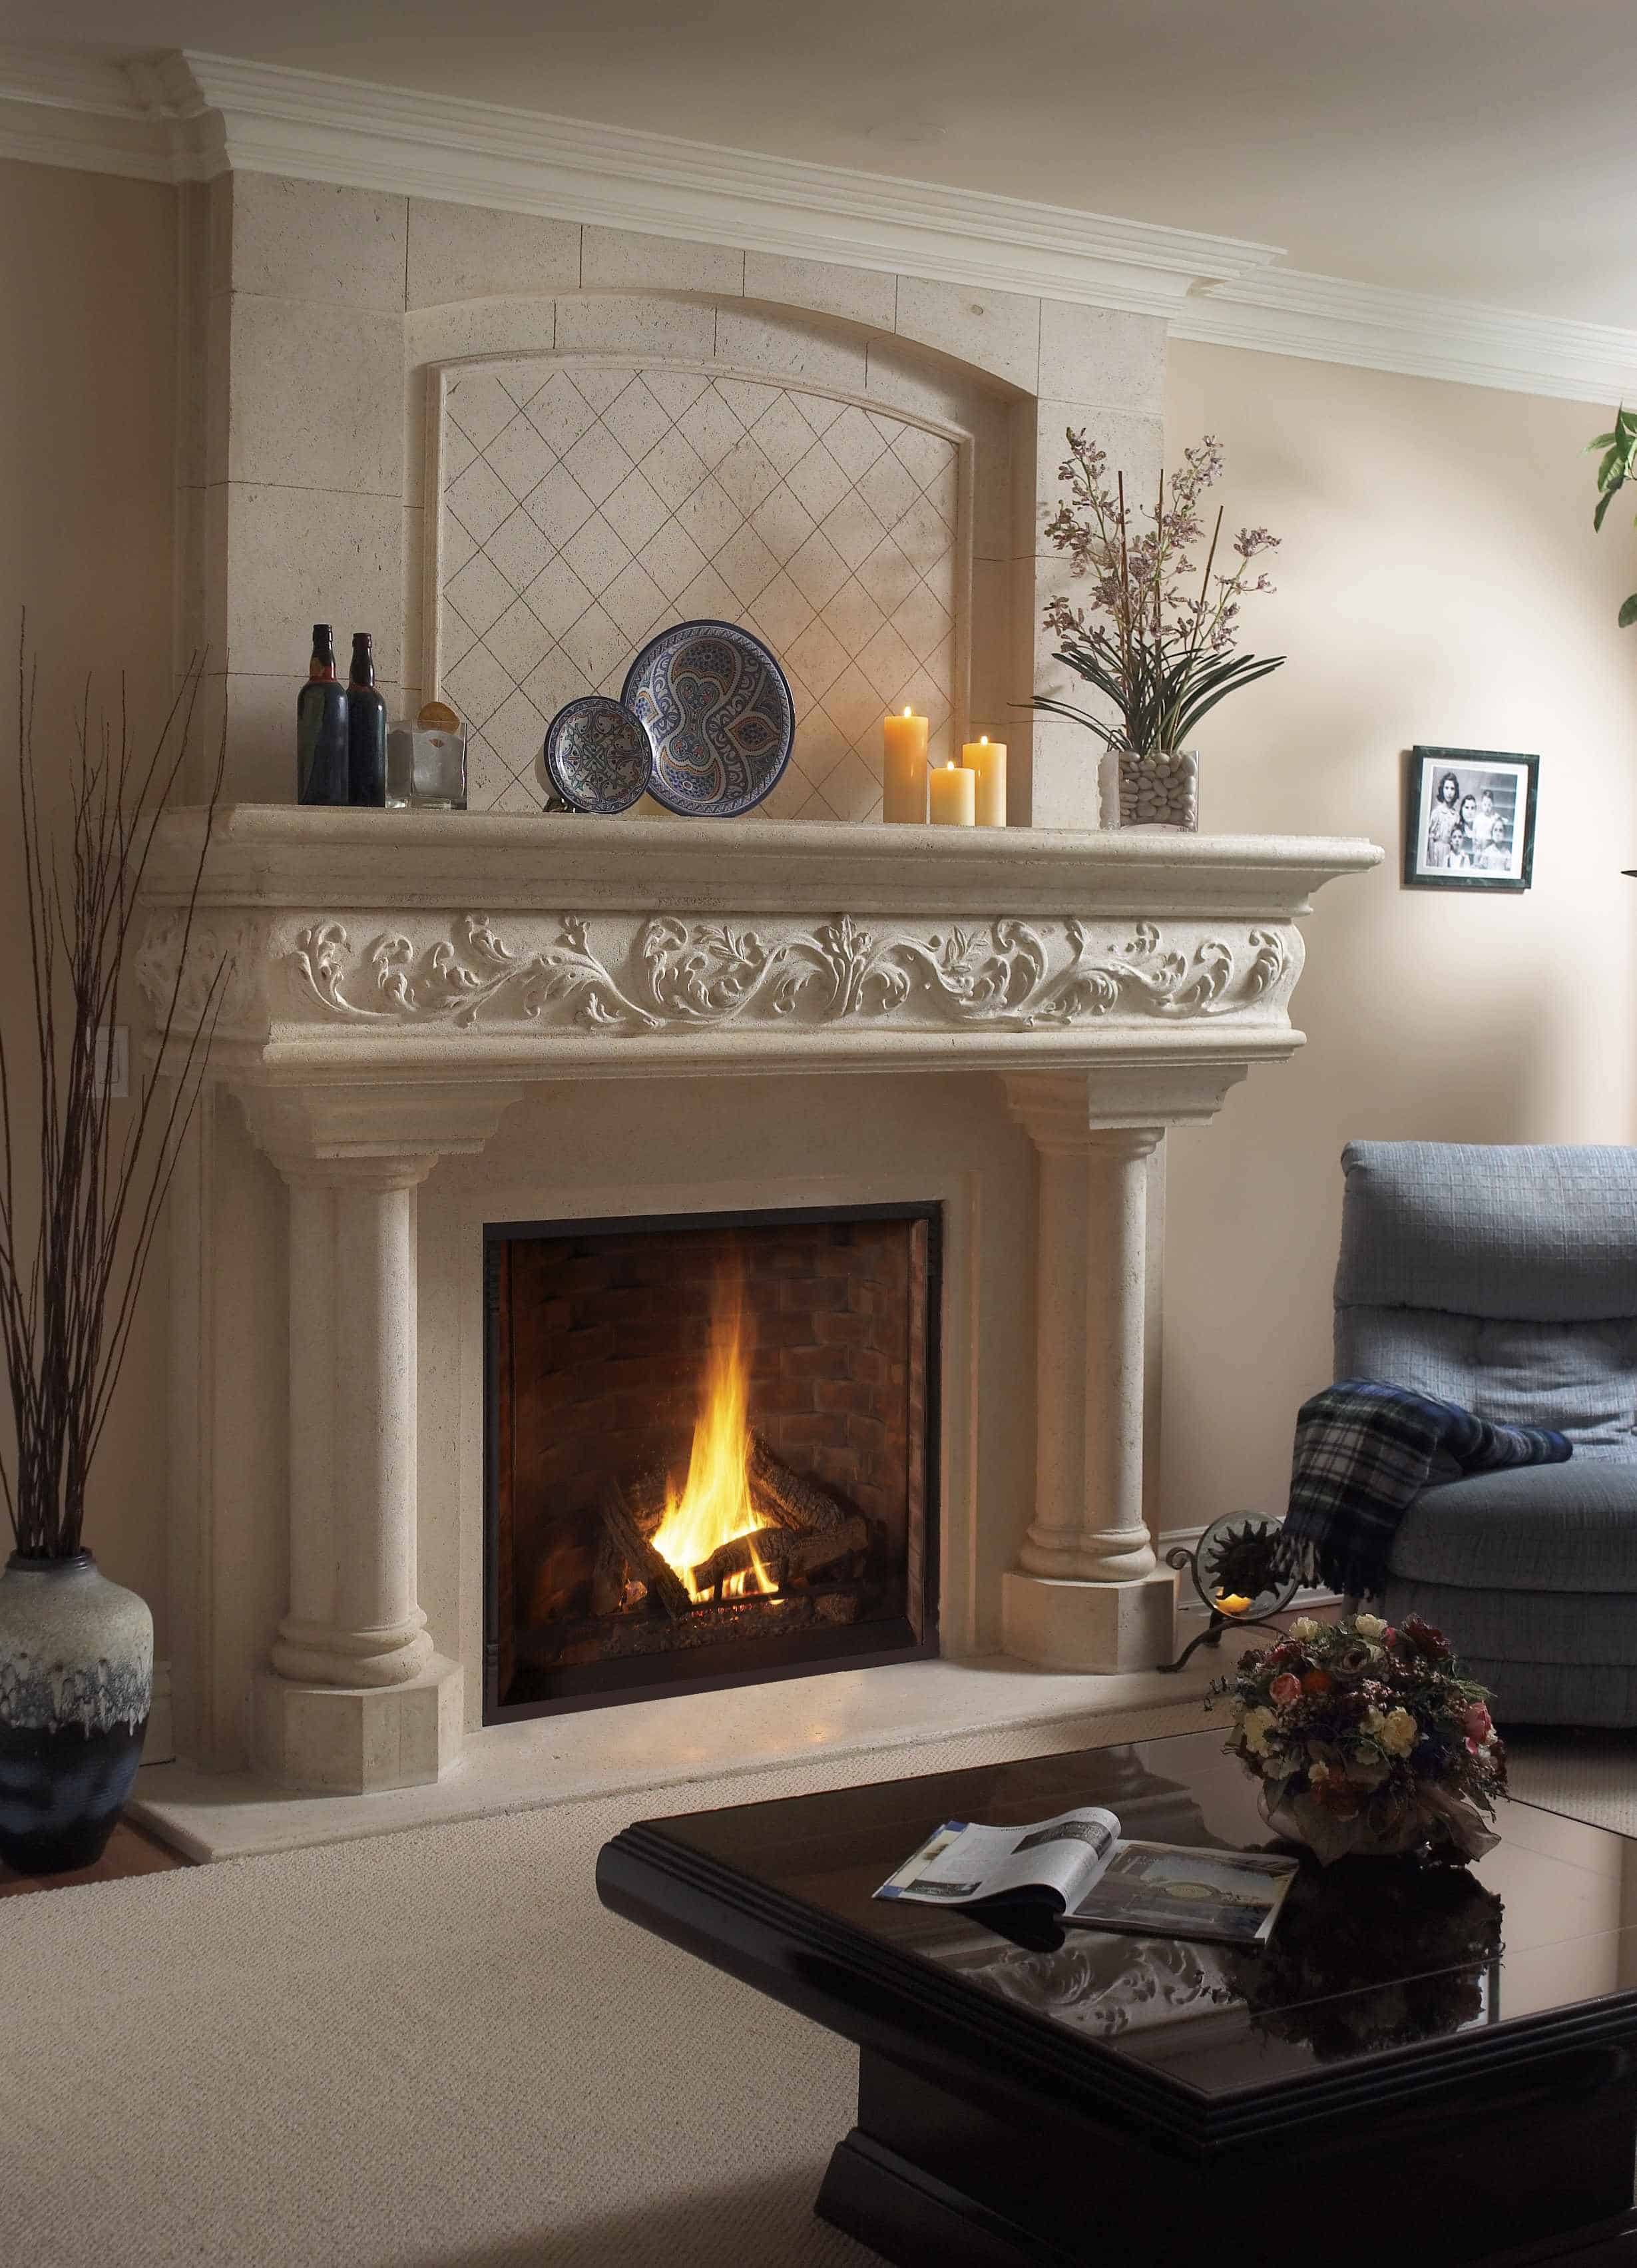 If you do not want to paint an intricate design on your fireplace,